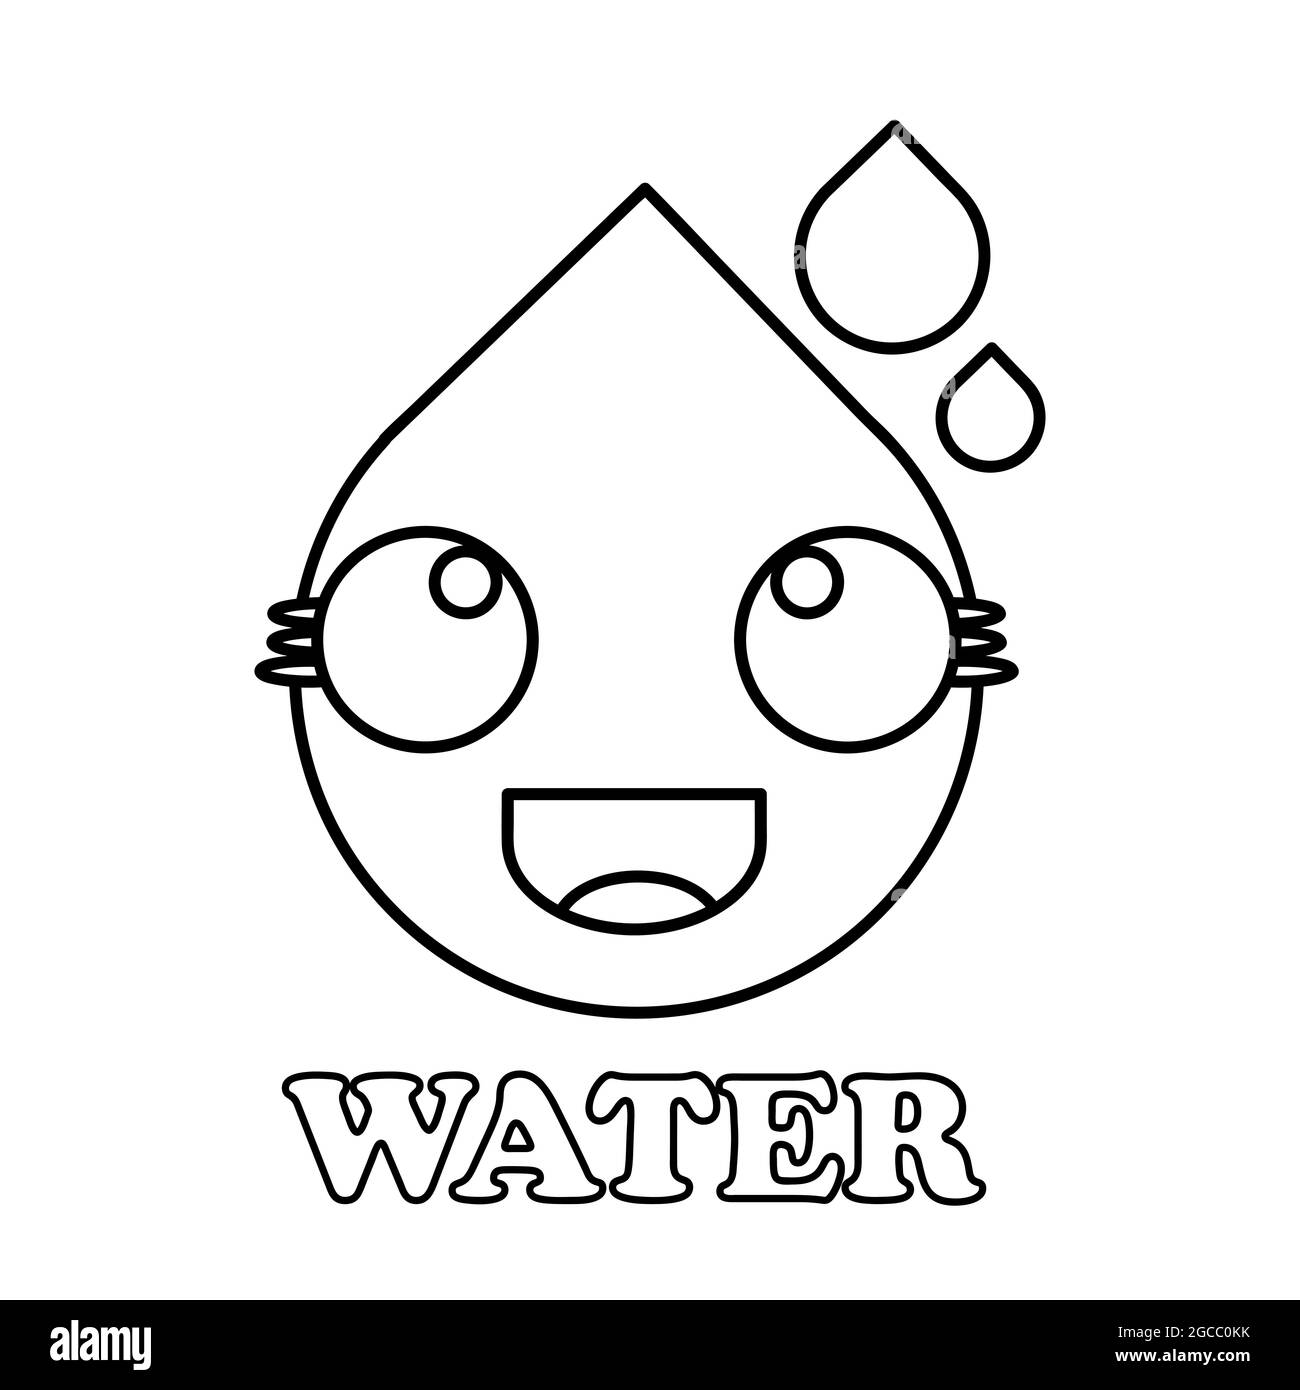 cute water coloring page. kawai style cartoon coloring page for children. on white background Stock Photo